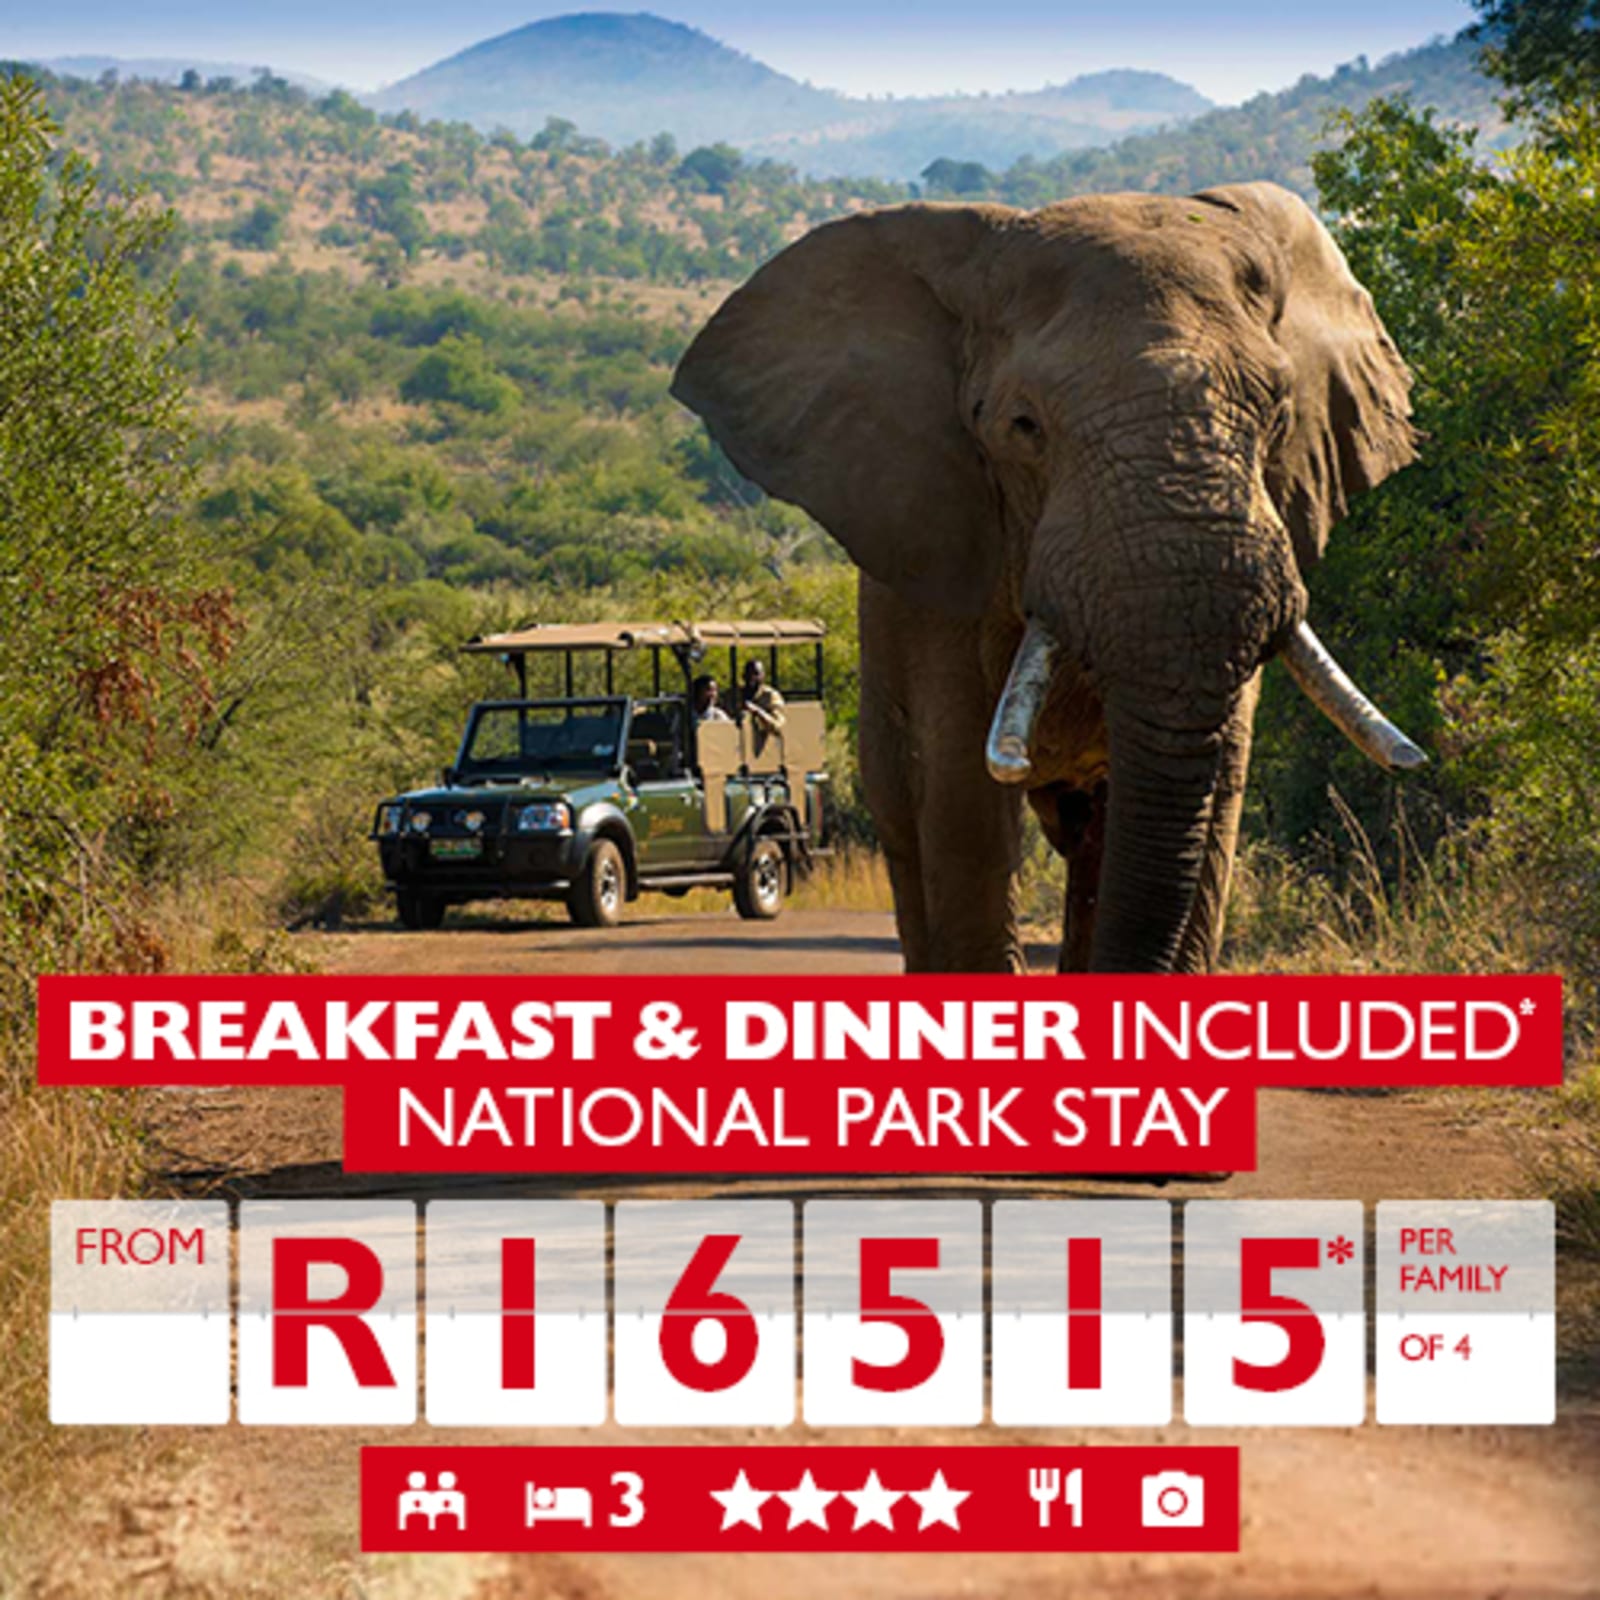 Breakfast & dinner included* National Park Stay from R16515* per family of 4